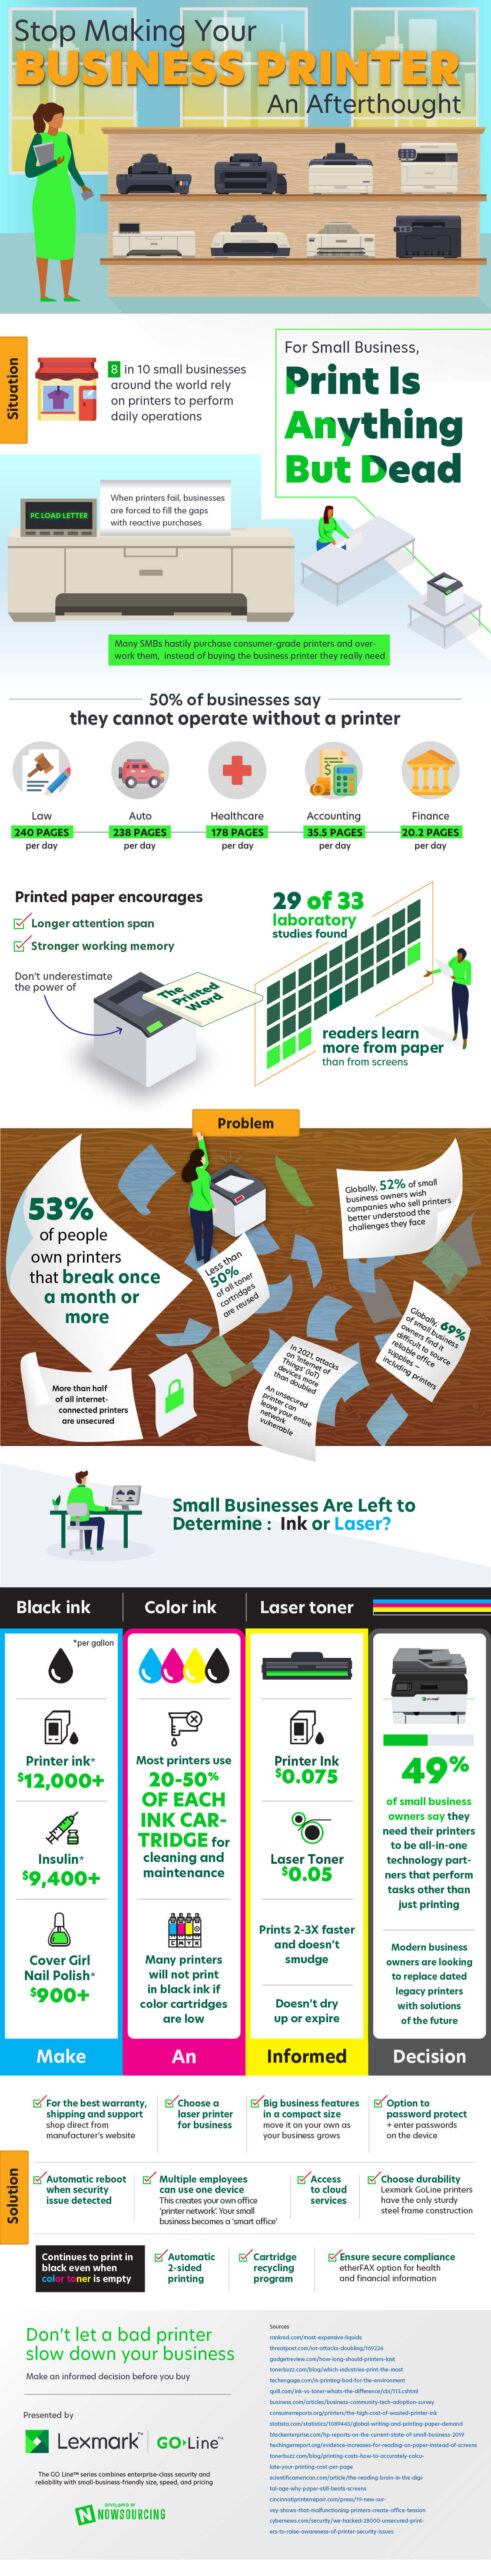 best small business printer infographic scaled Stop Making Your Business Printer an Afterthought